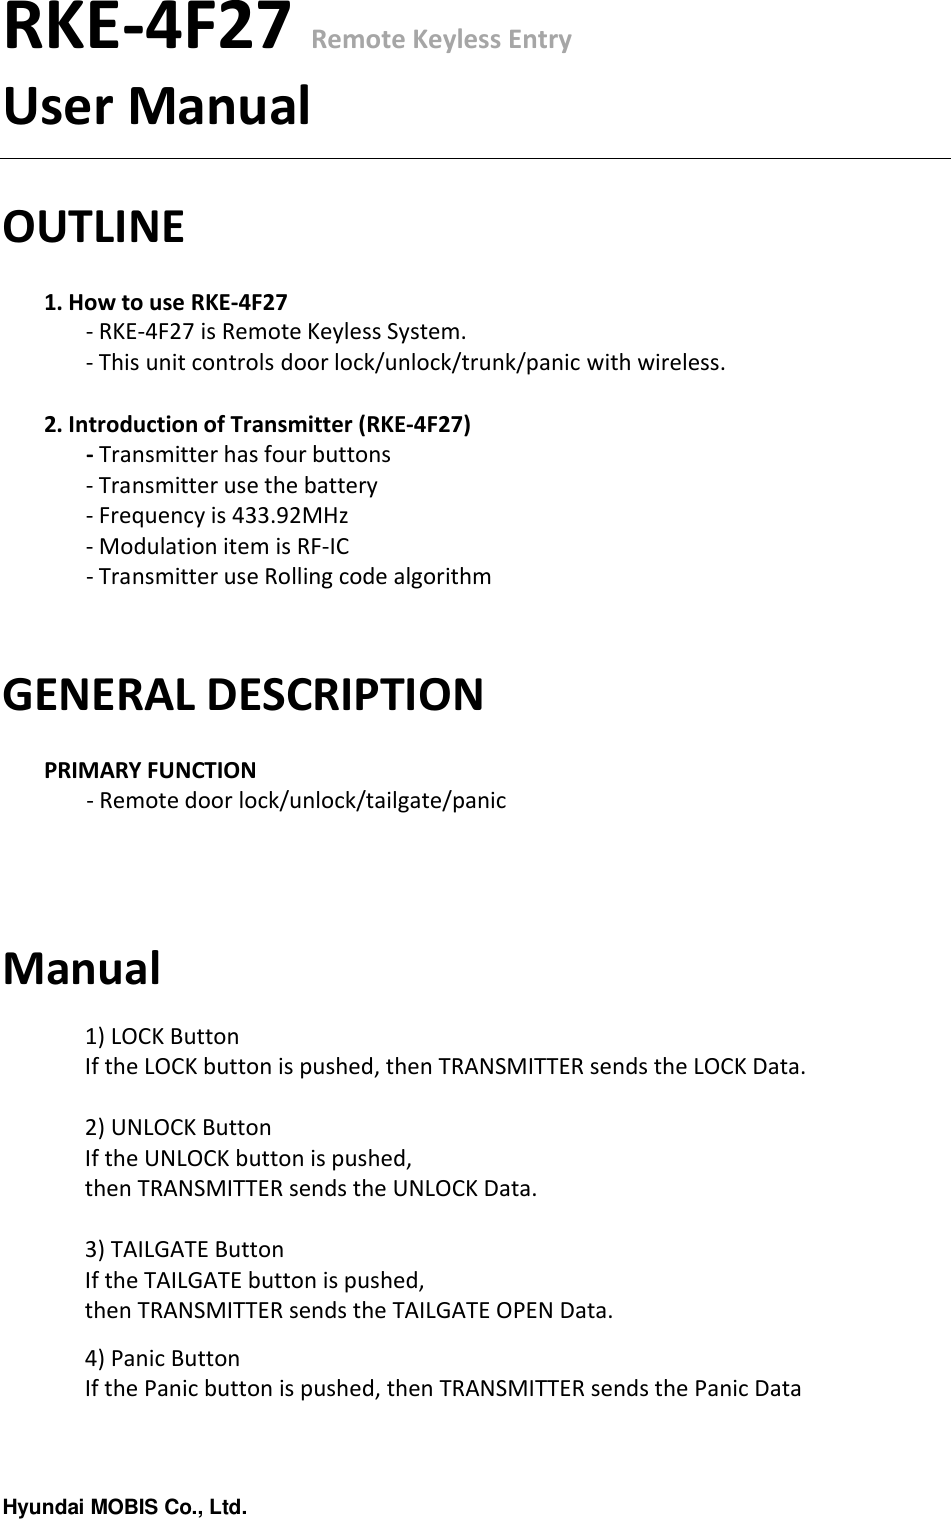 Hyundai MOBIS Co., Ltd.RKE-4F27 Remote Keyless EntryUser ManualOUTLINE1. How to use RKE-4F27- RKE-4F27 is Remote Keyless System.- This unit controls door lock/unlock/trunk/panic with wireless.2. Introduction of Transmitter (RKE-4F27)- Transmitter has four buttons- Transmitter use the battery- Frequency is 433.92MHz- Modulation item is RF-IC- Transmitter use Rolling code algorithmGENERAL DESCRIPTIONPRIMARY FUNCTION- Remote door lock/unlock/tailgate/panicManual1) LOCK ButtonIf the LOCK button is pushed, then TRANSMITTER sends the LOCK Data.2) UNLOCK ButtonIf the UNLOCK button is pushed, then TRANSMITTER sends the UNLOCK Data.3) TAILGATE ButtonIf the TAILGATE button is pushed, then TRANSMITTER sends the TAILGATE OPEN Data.4)Panic ButtonIf the Panic button is pushed, then TRANSMITTER sends the Panic Data